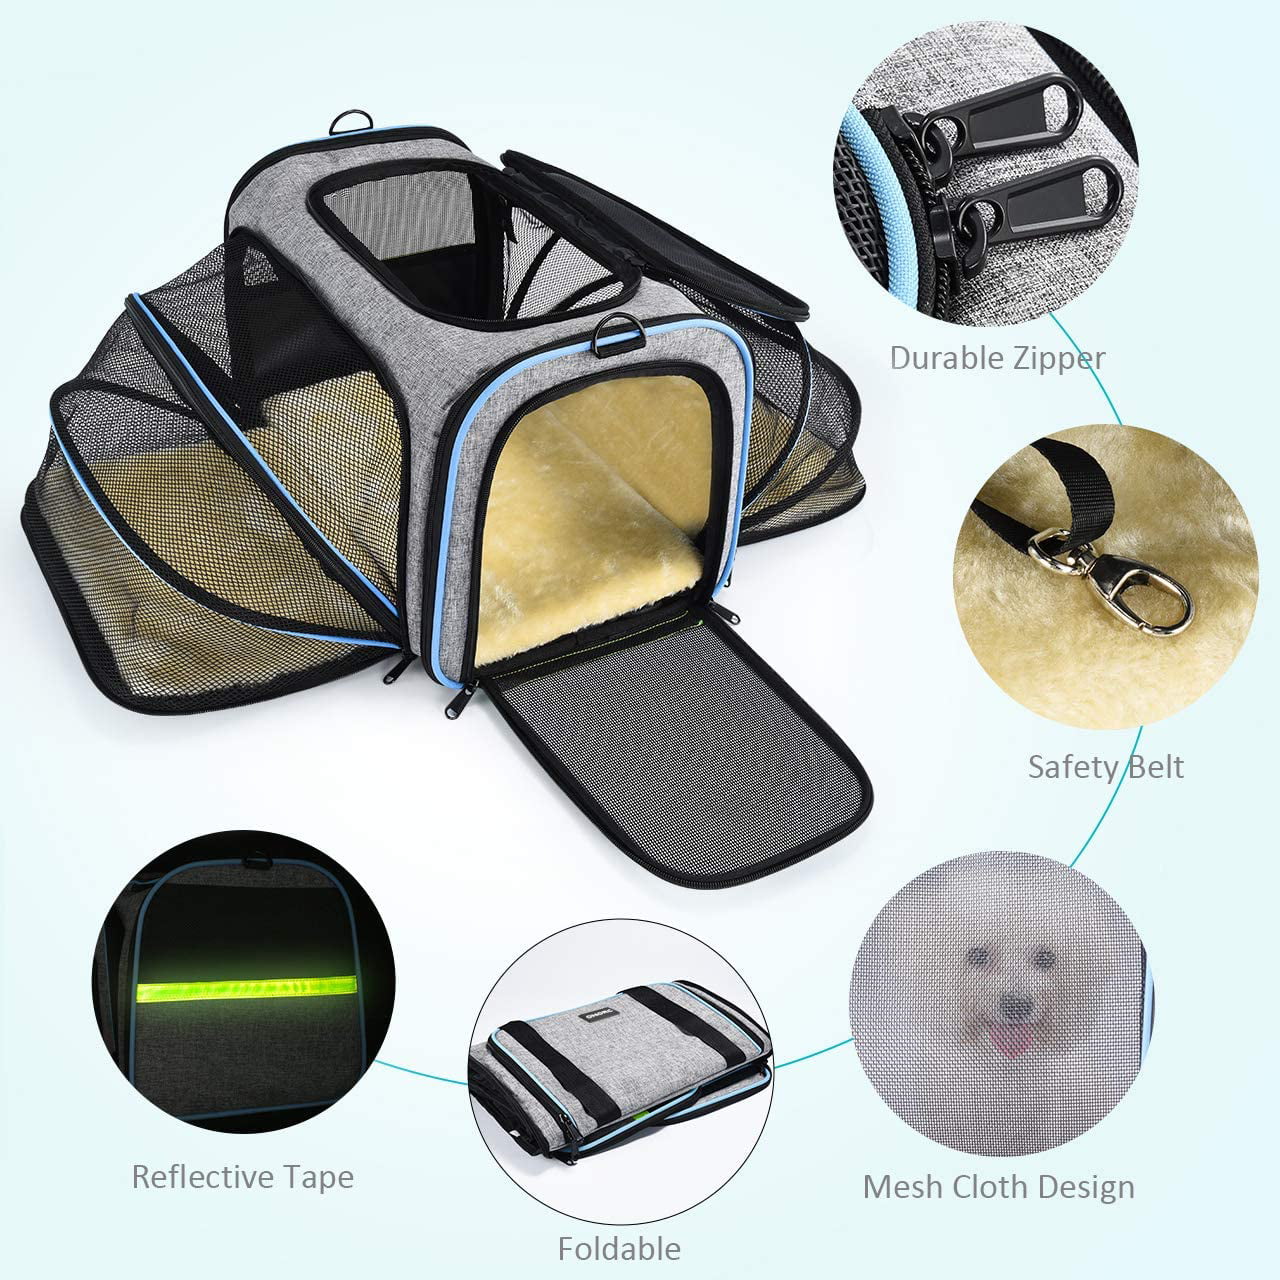 3 Open Doors Mesh Window and Escape-Proof Buckle X-cosrack Expandable Pet Travel Bag Airline Approved Soft-Sided Pet Travel Carrier for Small Medium Cats